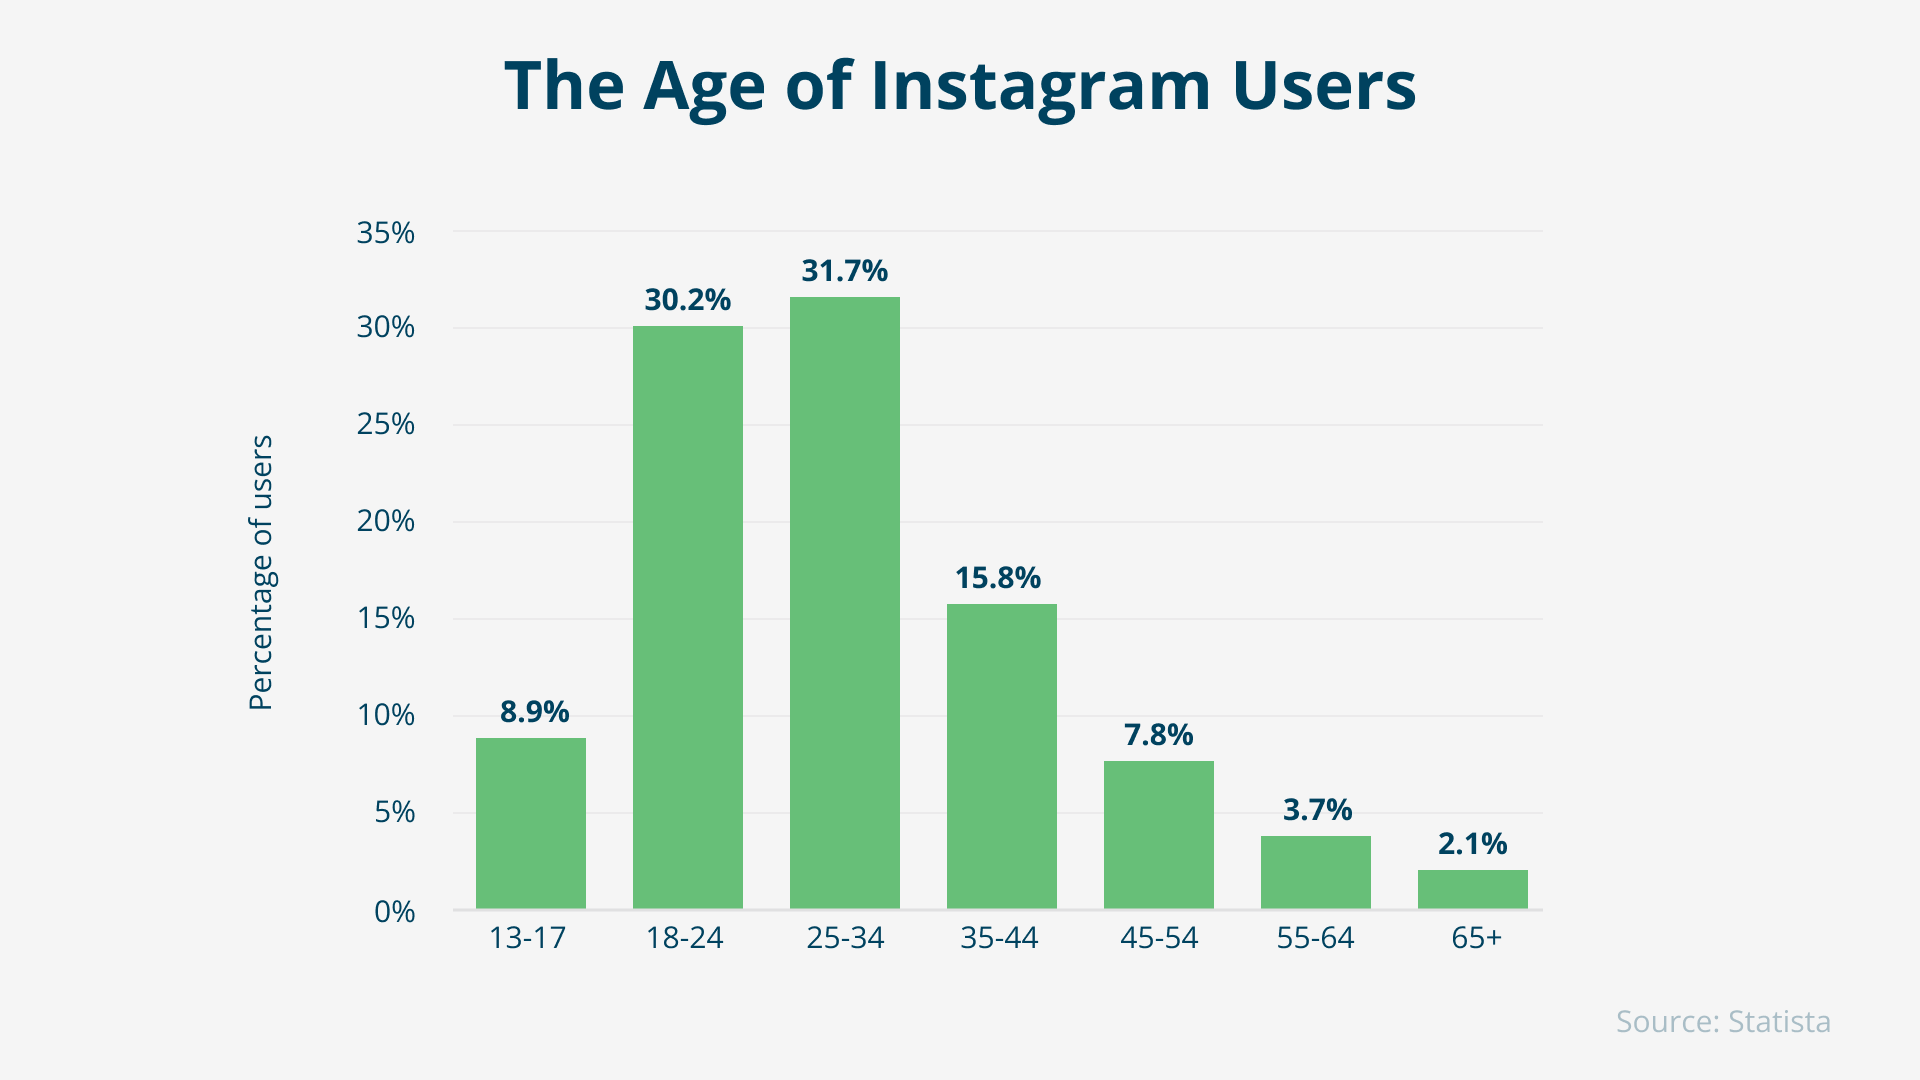 Over 30% of Instagram users are between the ages of 25 and 34.